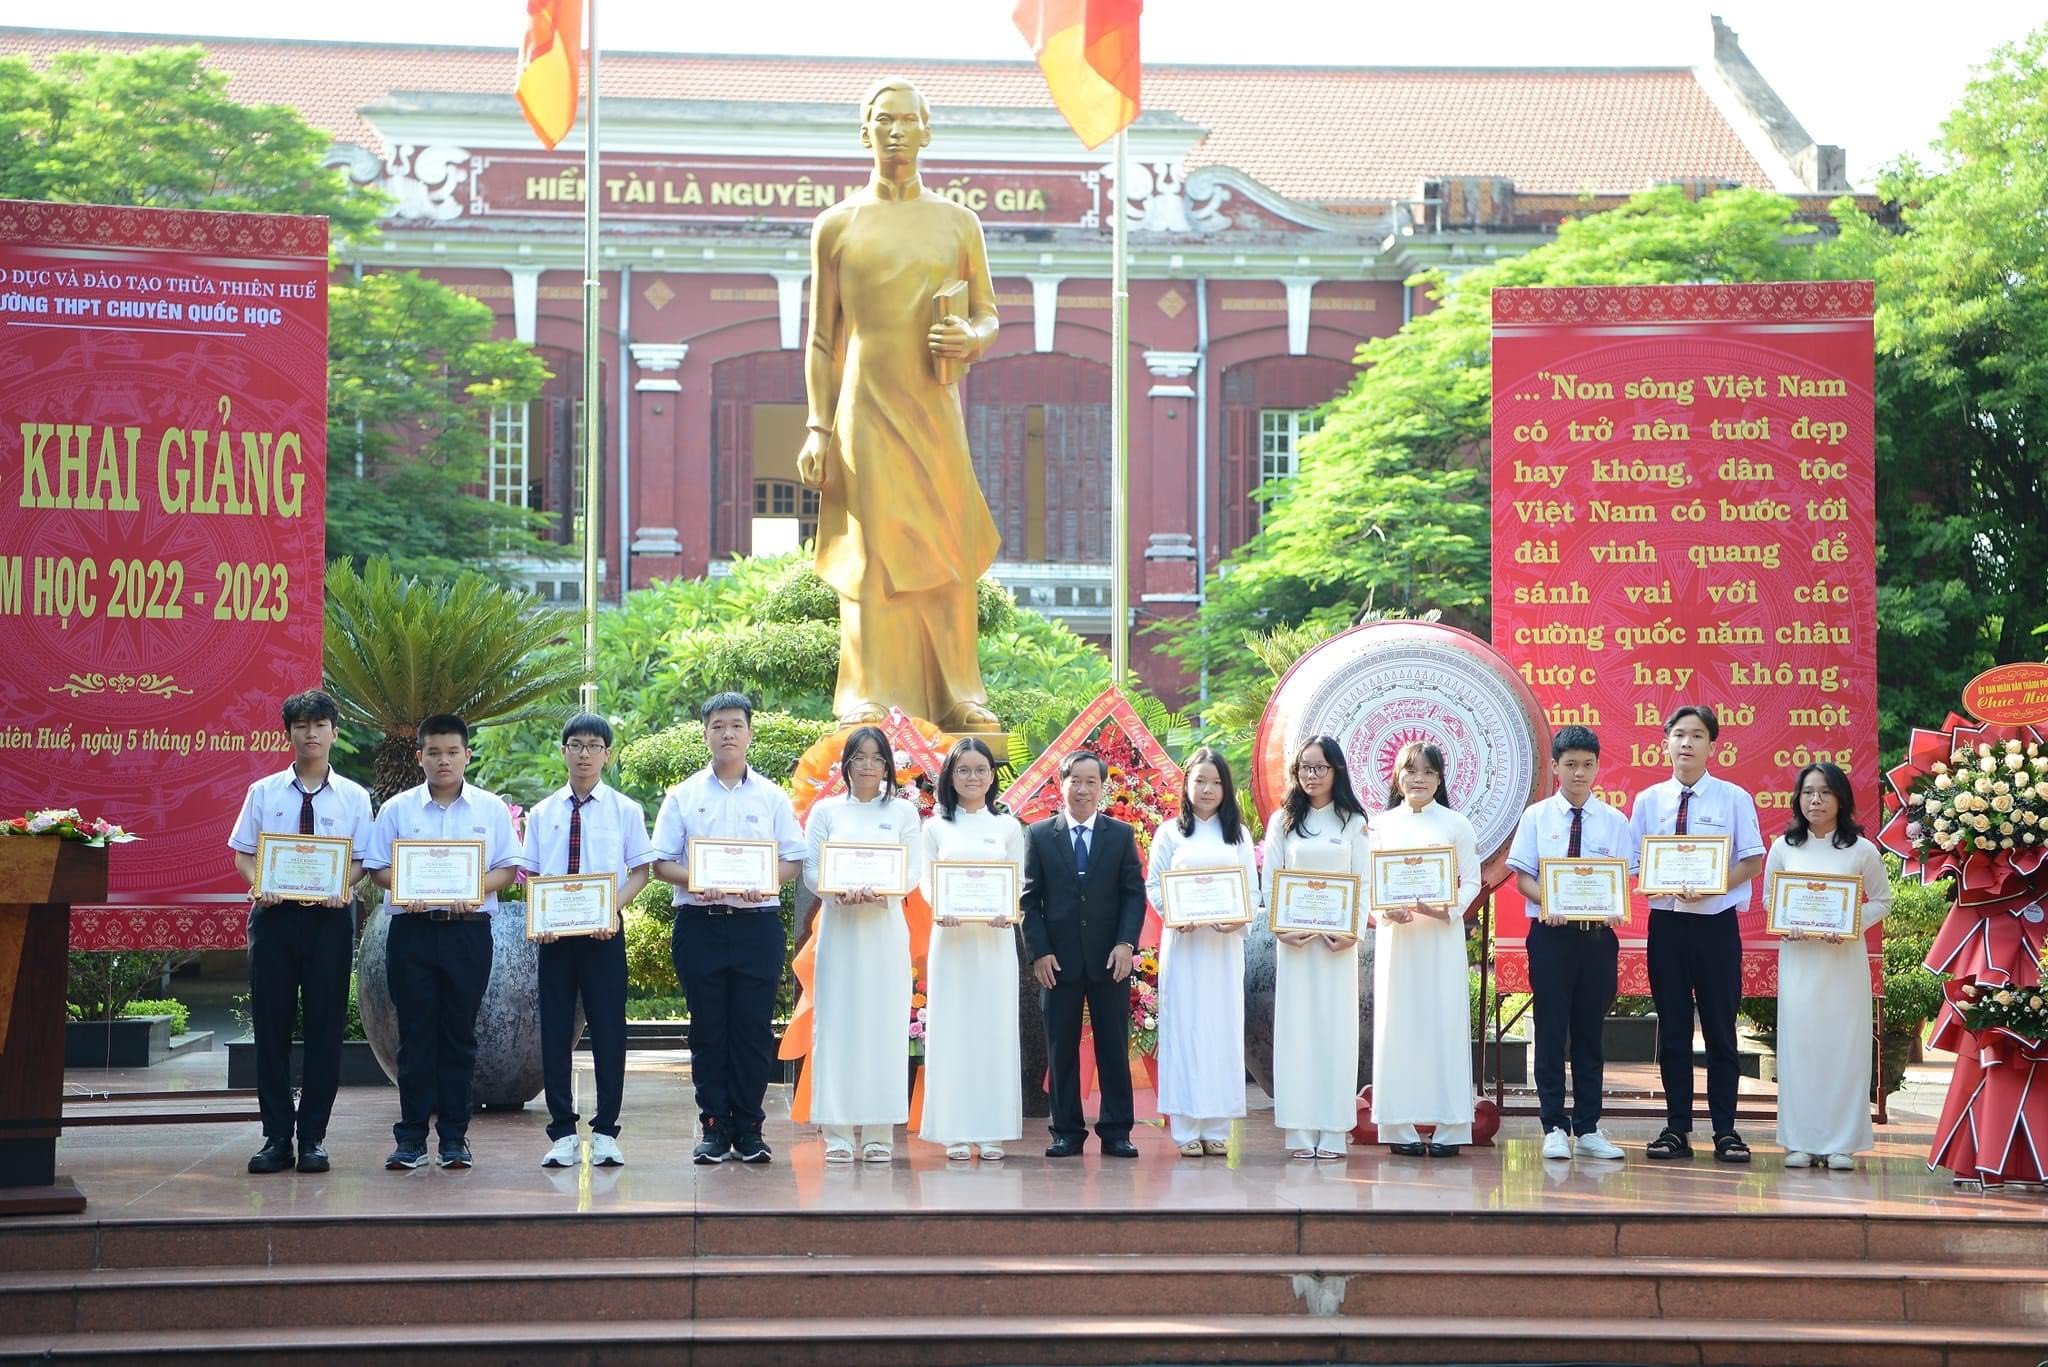 Vietnam's public school system is one of the popular types of institutions in Vietnam for many English teachers